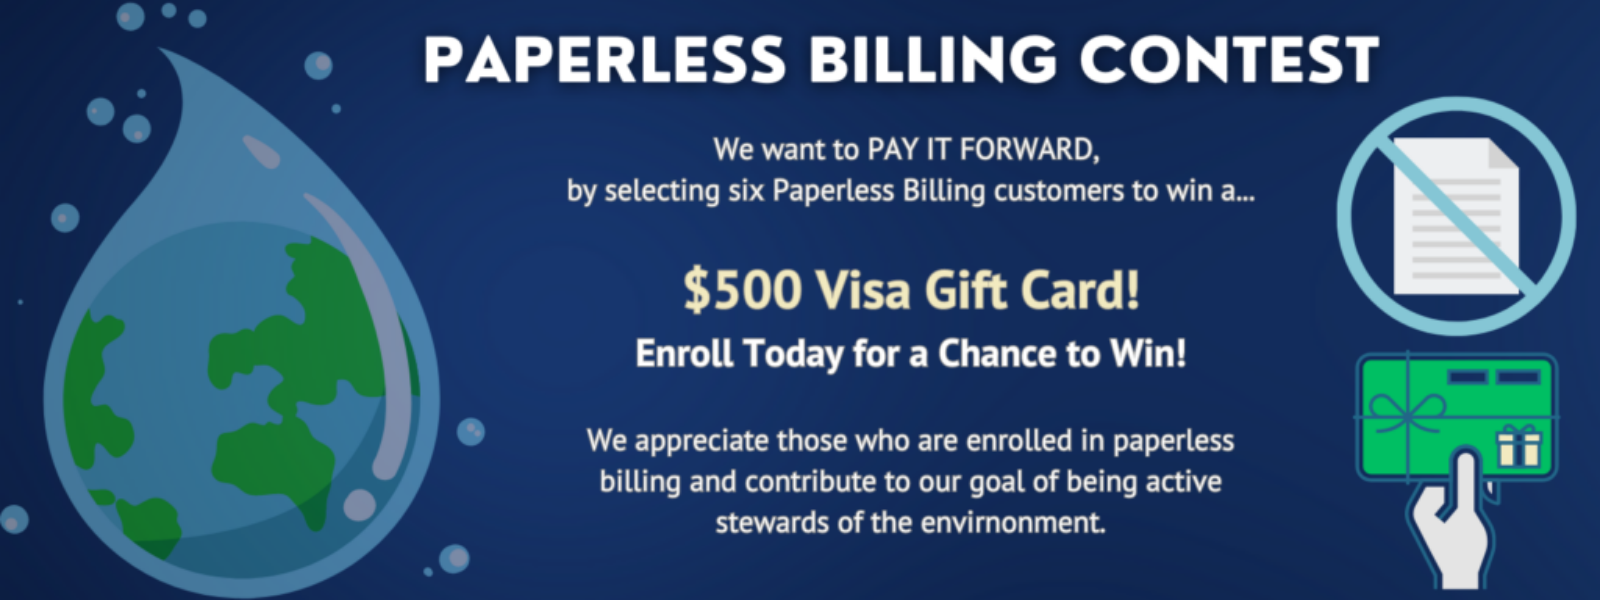 Go Paperless and Enter for a Chance to Win $500